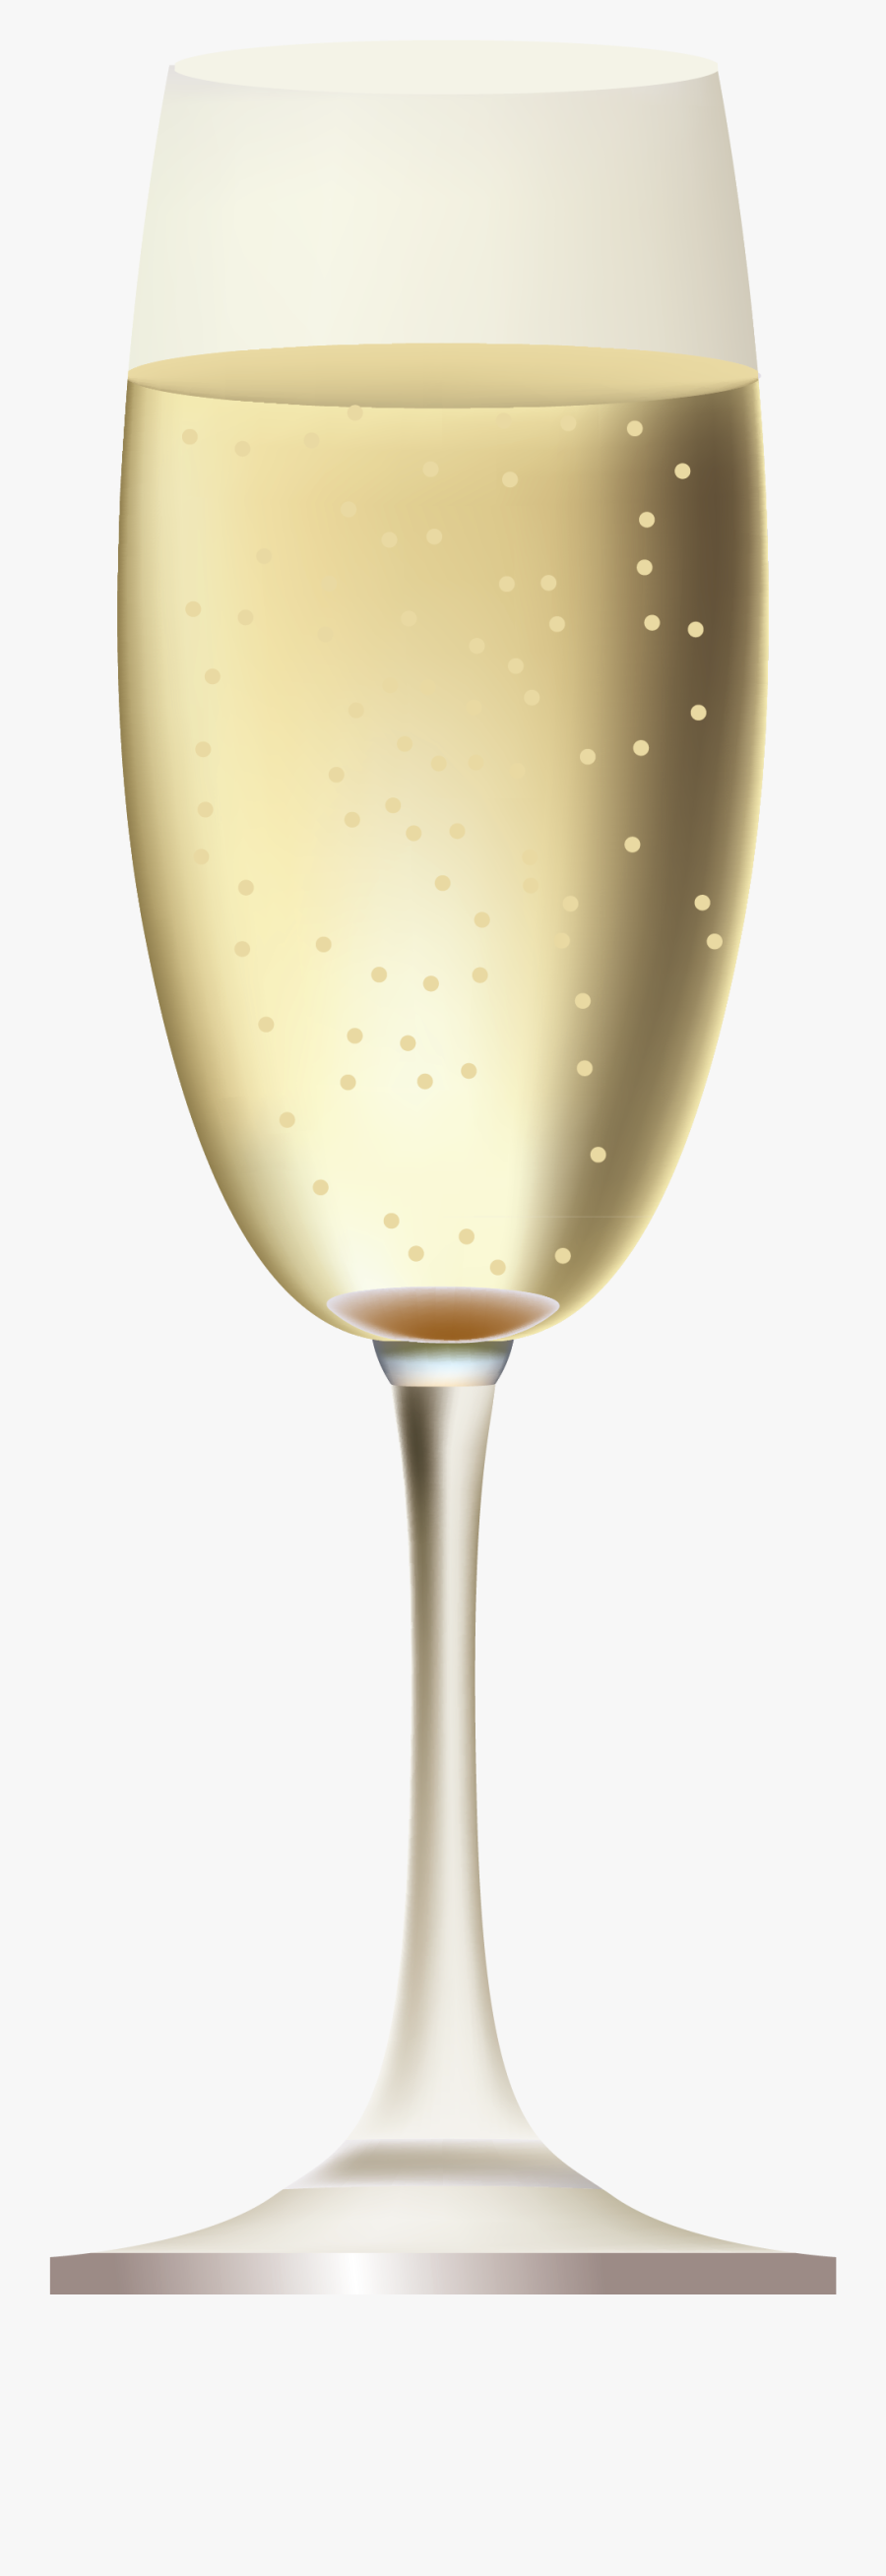 Champagne Glass Png - Wine Glass, Transparent Clipart